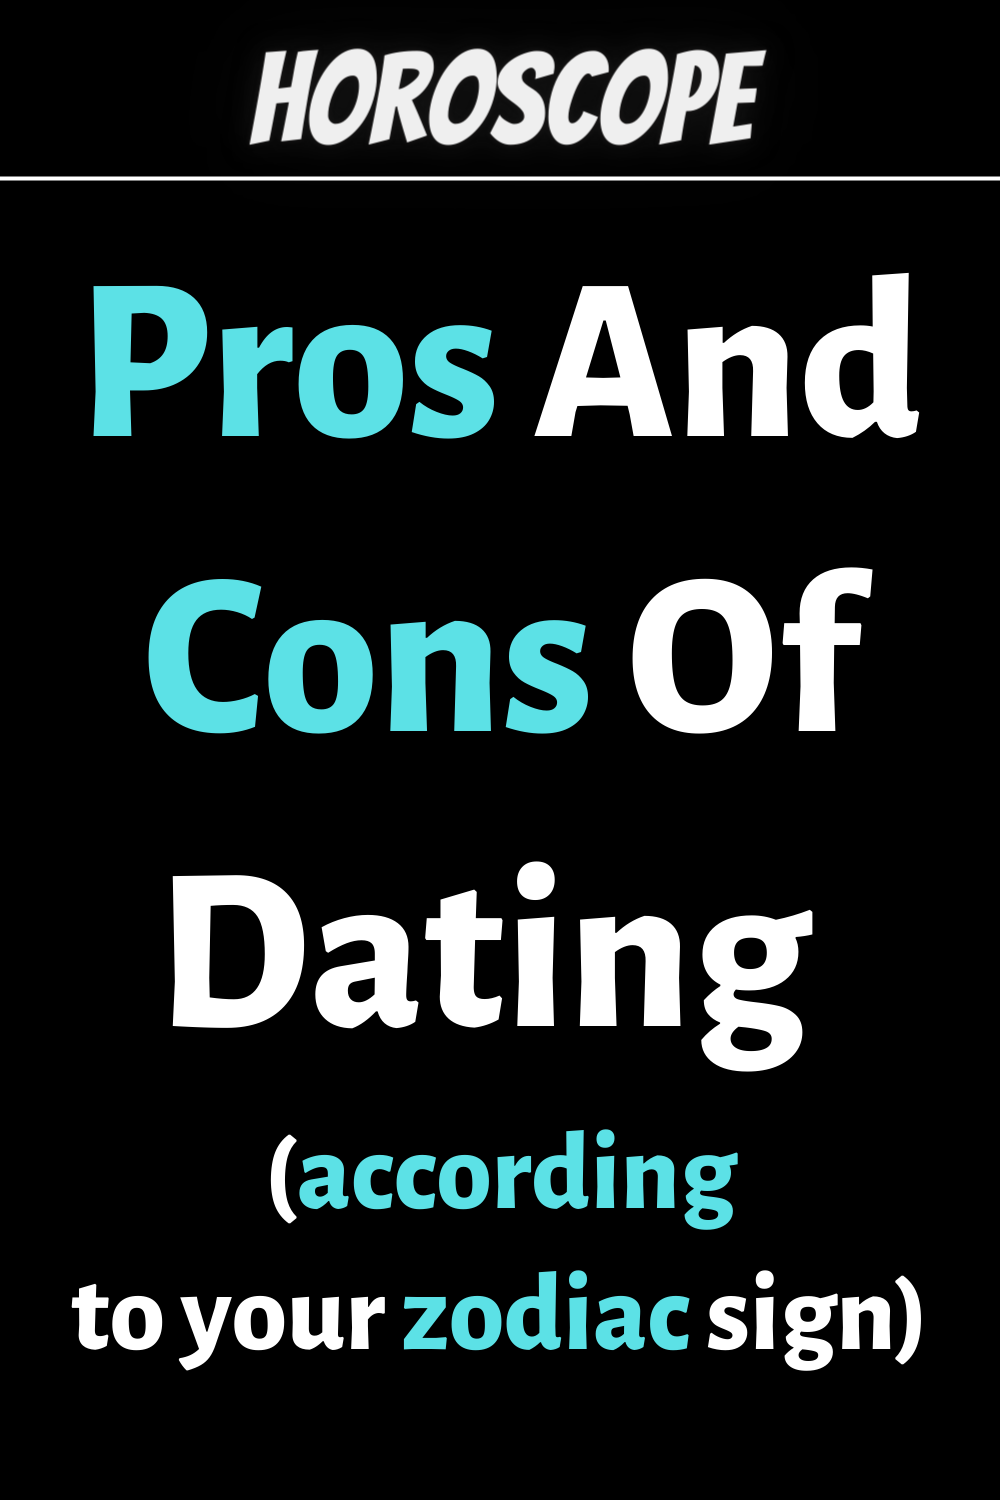 Pros And Cons Of Dating Each Zodiac Sign